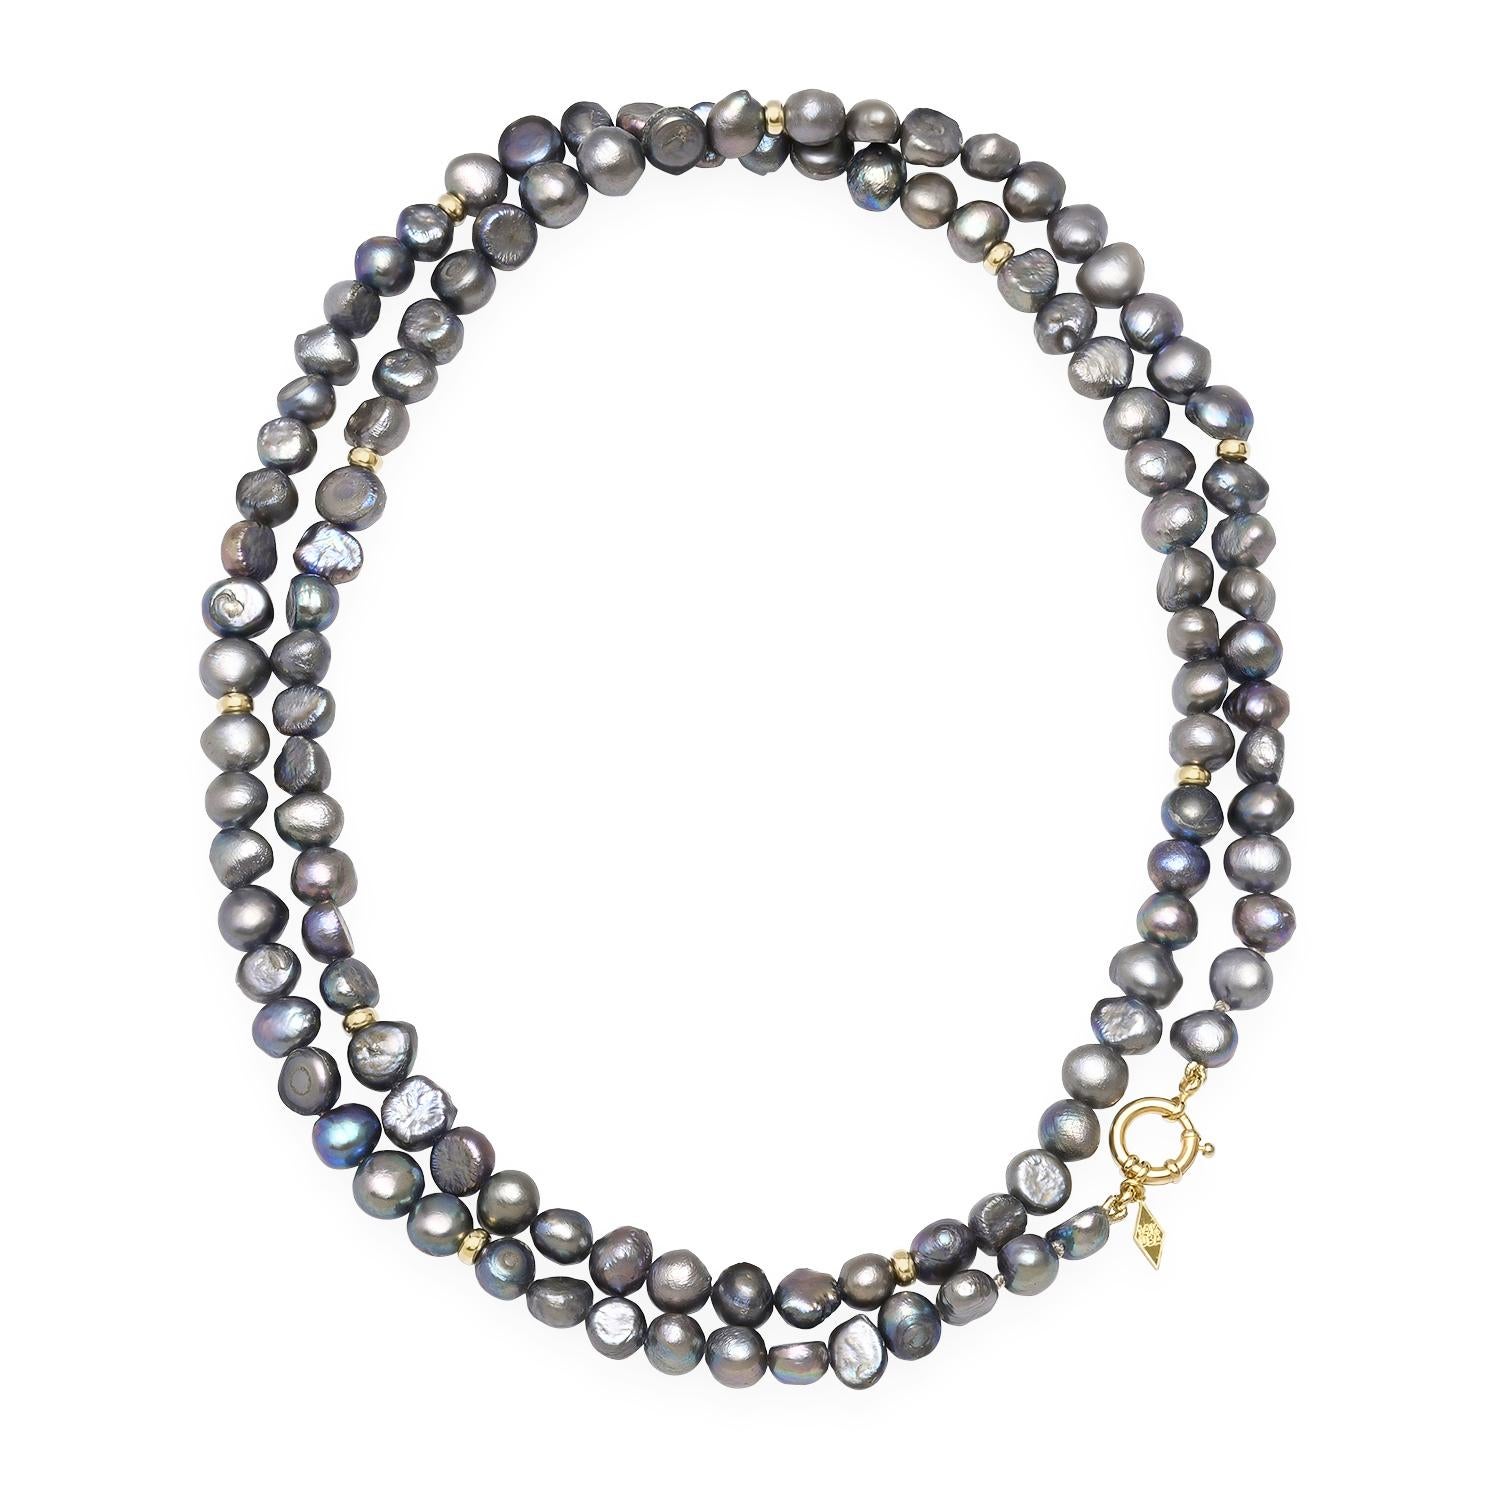 It's all about adding color even if it's a dark metallic Freshwater Pearl necklace with asymmetrical beads features a 14K gold chunky sailor clasp for secure closure, allowing you to easily attach charms, pendants, or medallions to create a